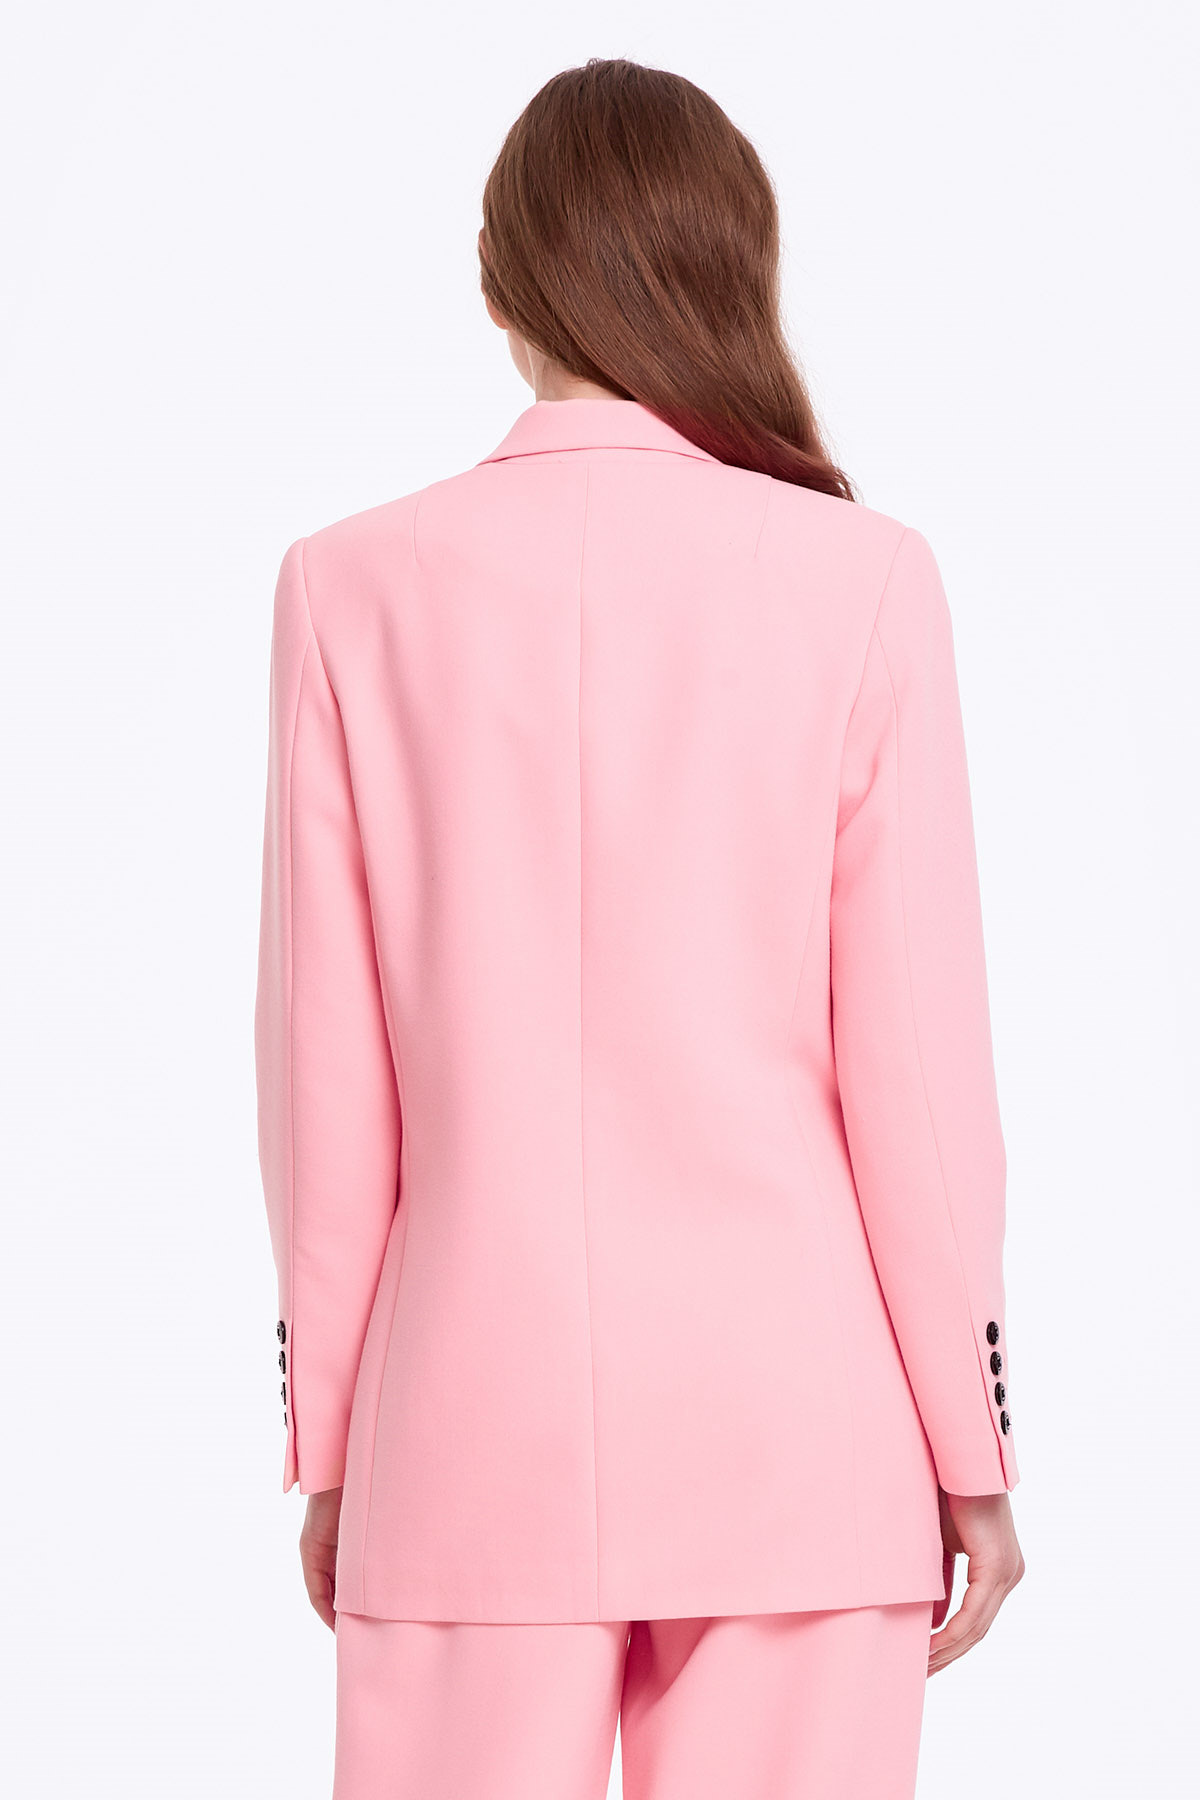 Double-breasted pink jacket with pockets, photo 4